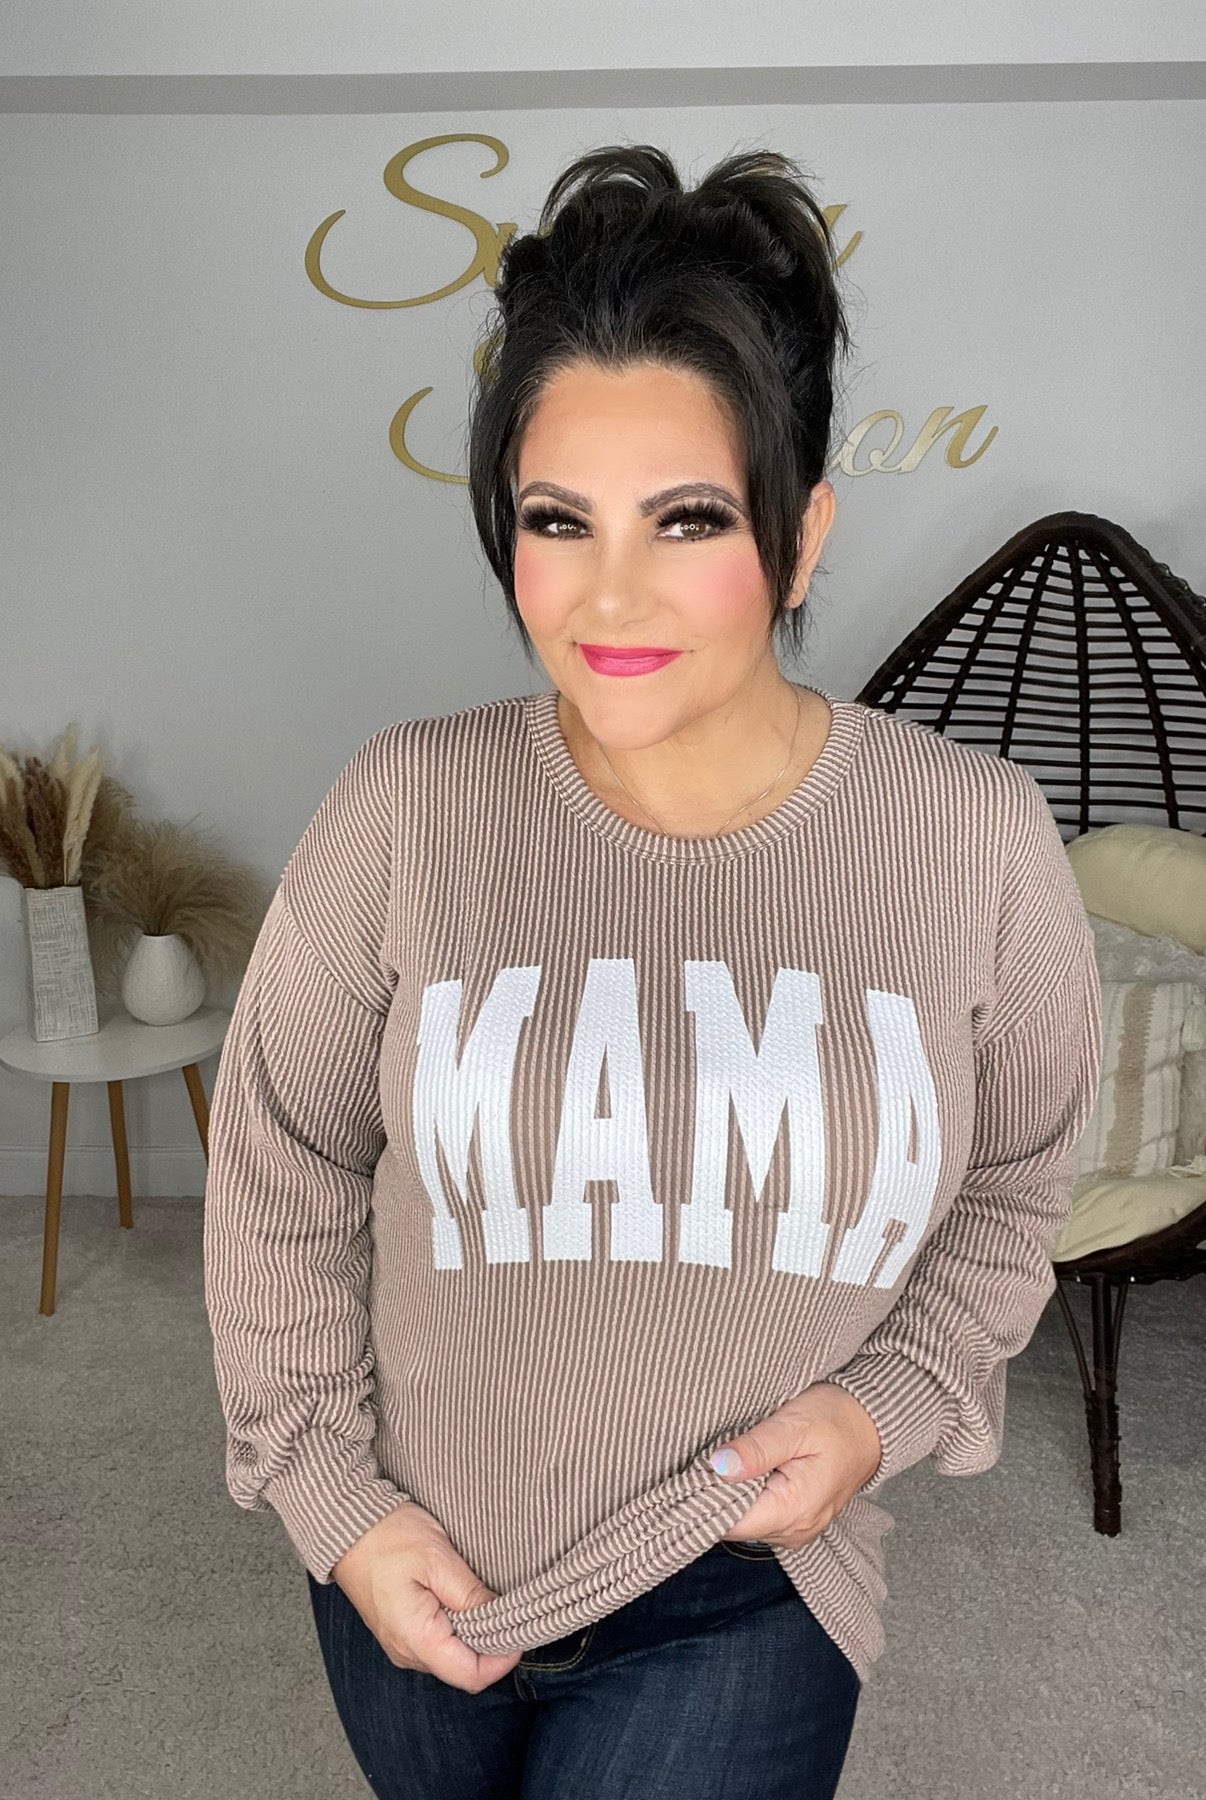 Mama Corded Sweatshirt-160 Sweatshirts- Simply Simpson's Boutique is a Women's Online Fashion Boutique Located in Jupiter, Florida